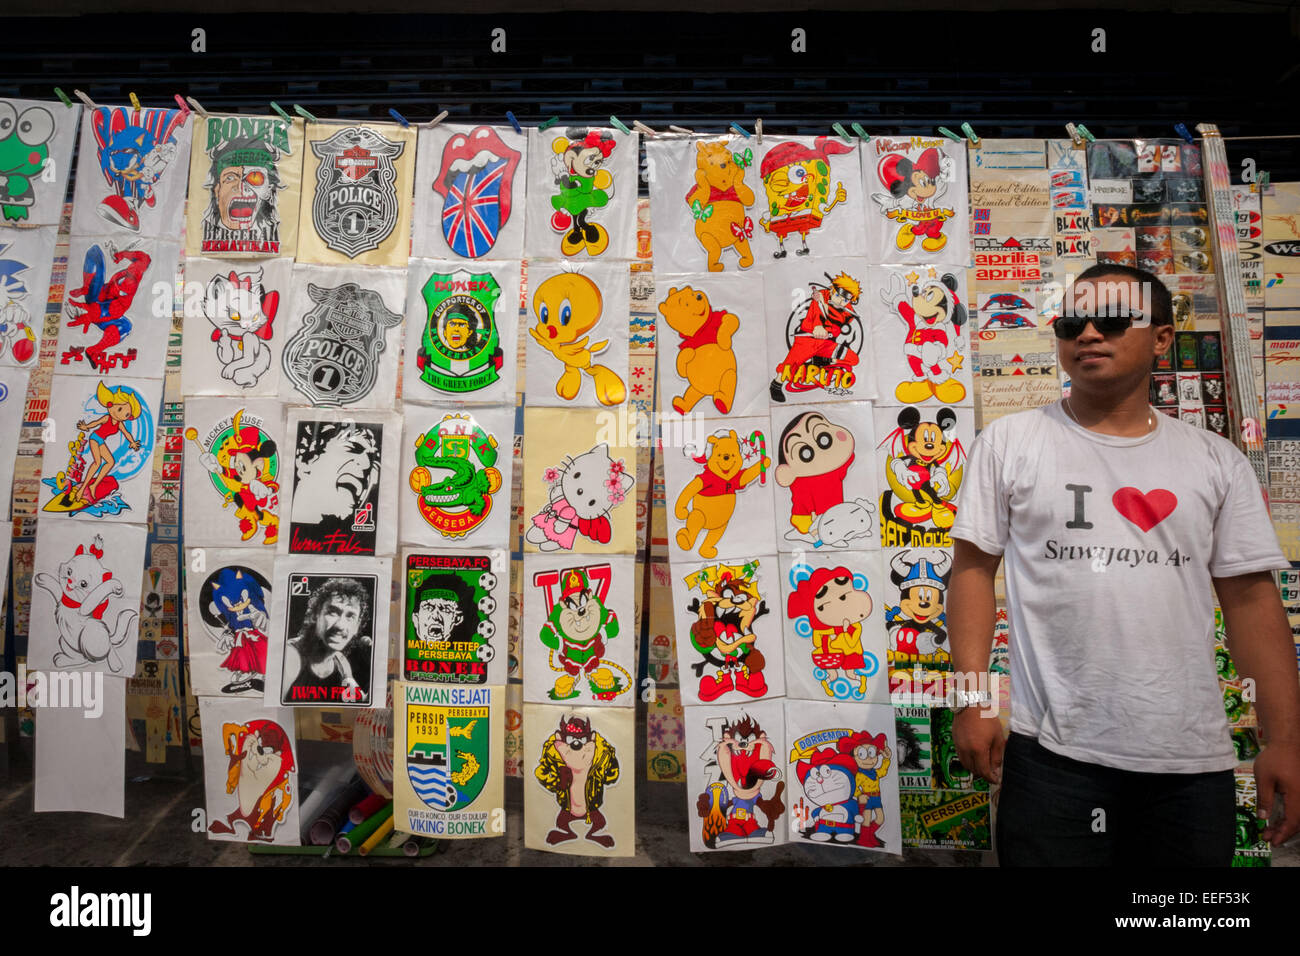 A vendor wearing 'I love Sriwijaya Air' t-shirt waiting for customers at a roadside shop of fictional character stickers in Surabaya, Indonesia. Stock Photo